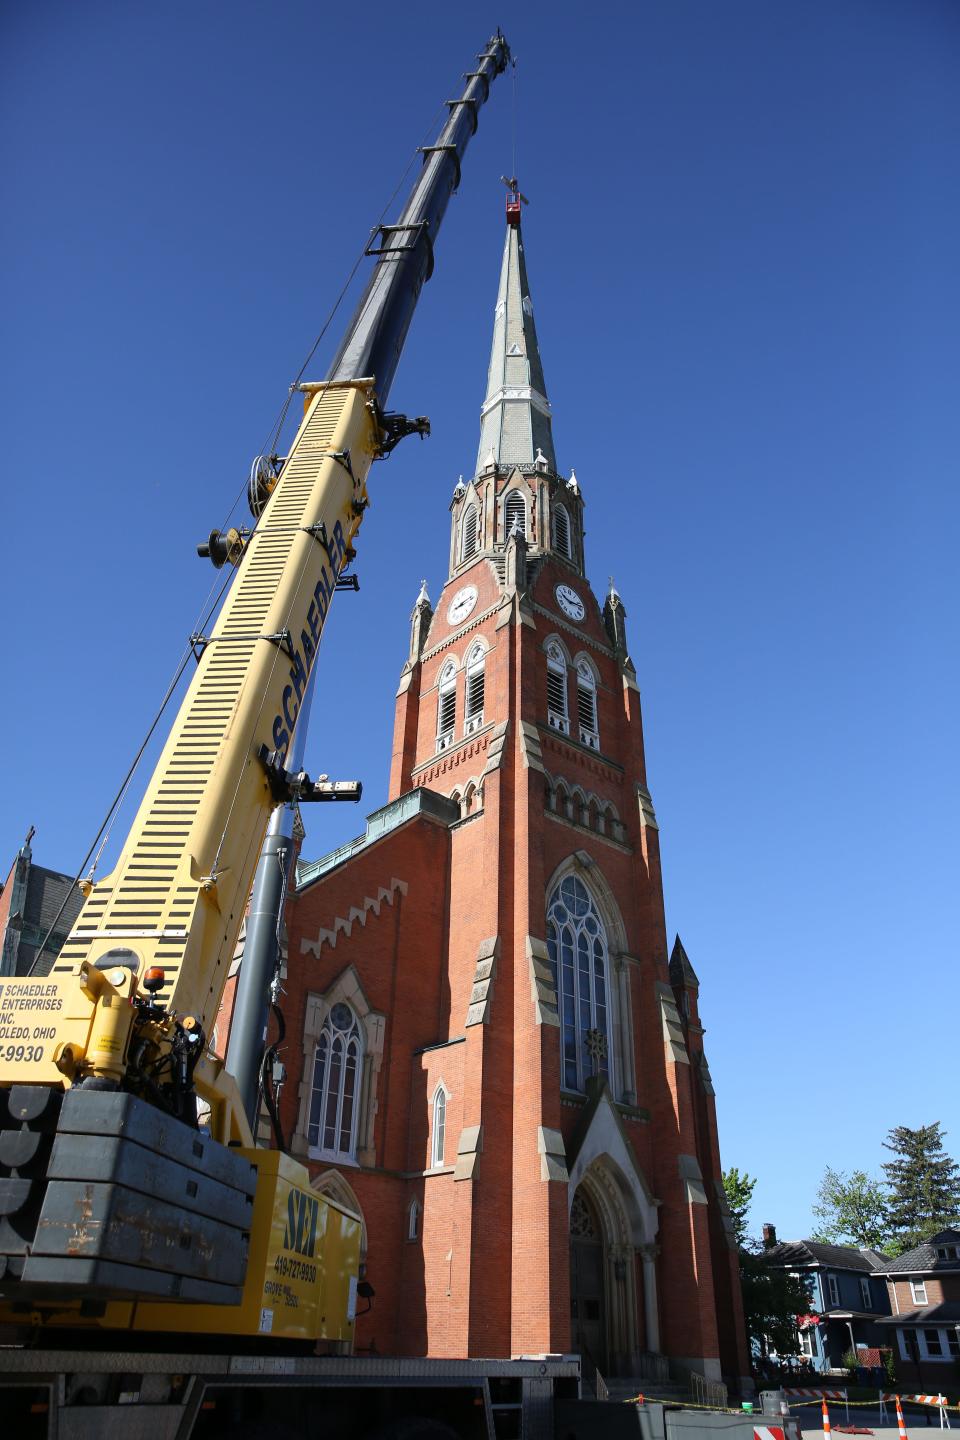 A crane from Schaedler Enterprises Inc. in Toledo, works with Detroit Steeplejack Bryan Dulsky, with much needed restoration of the Saint Joseph Catholic Church, at 709 Croghan St. in Fremont.